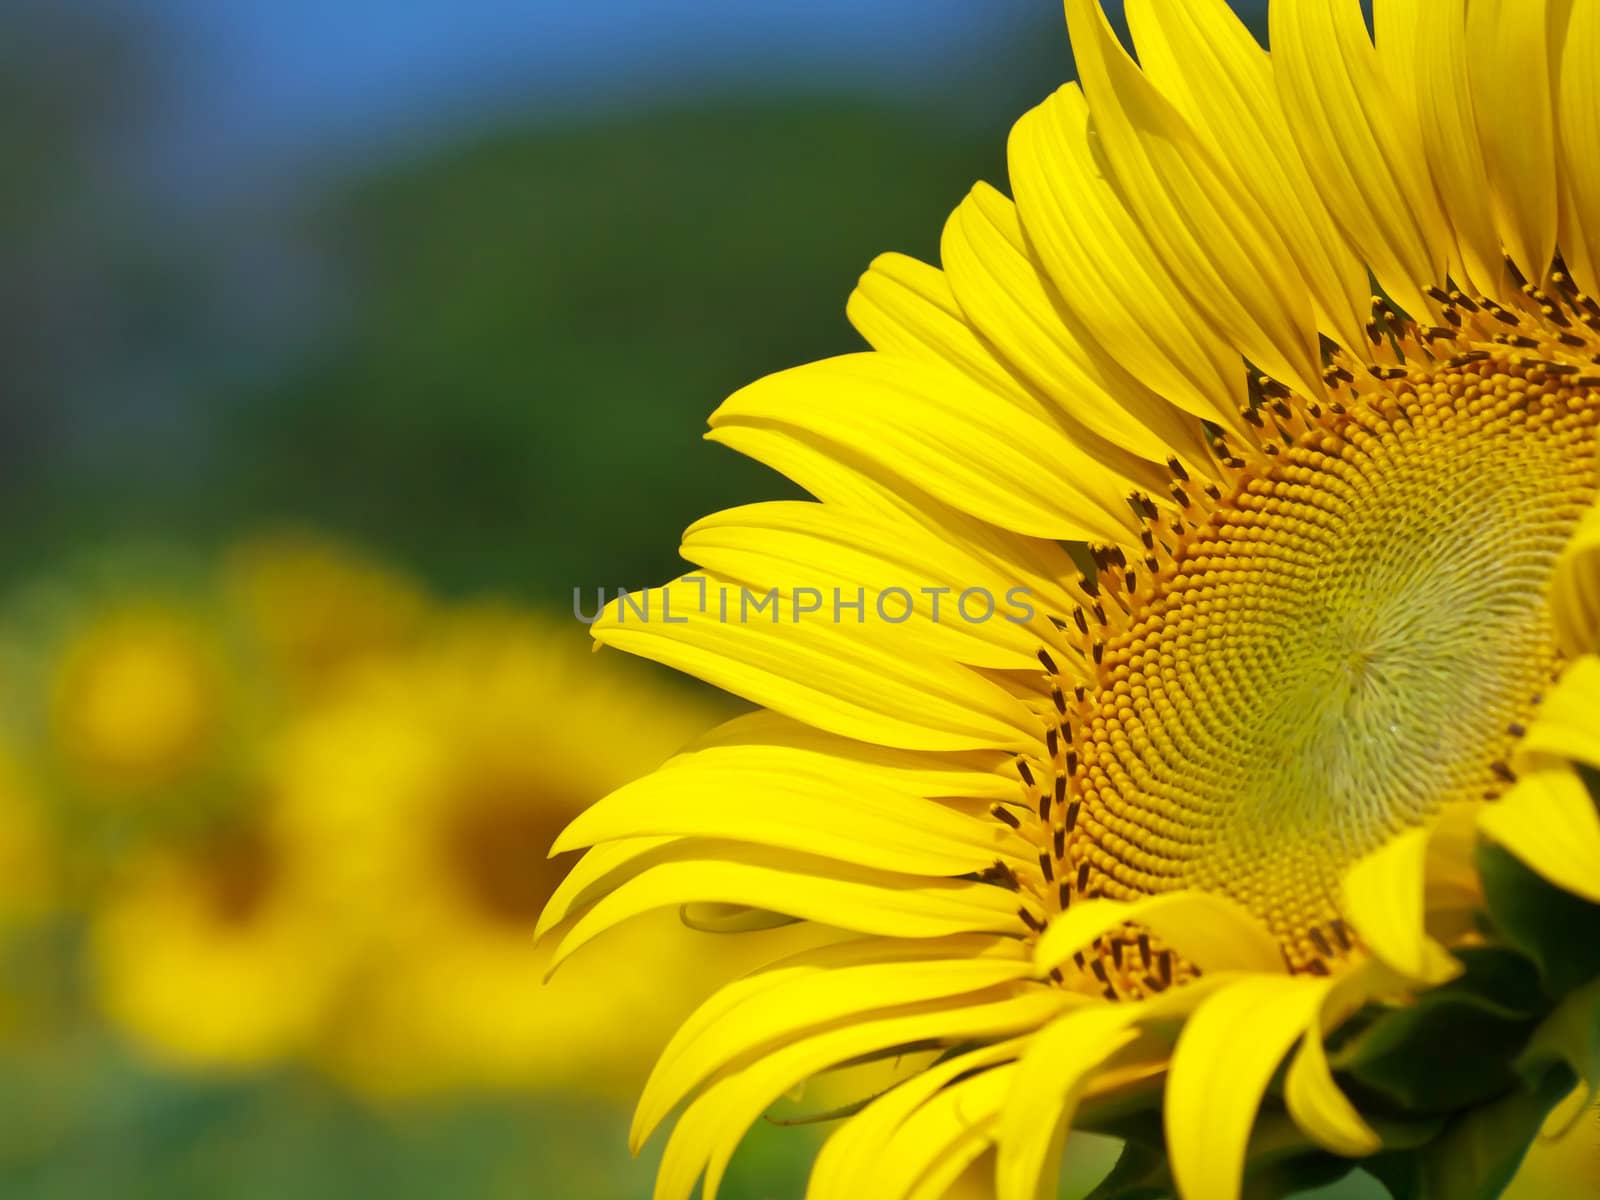 Beautiful sunflower with out of focus background
